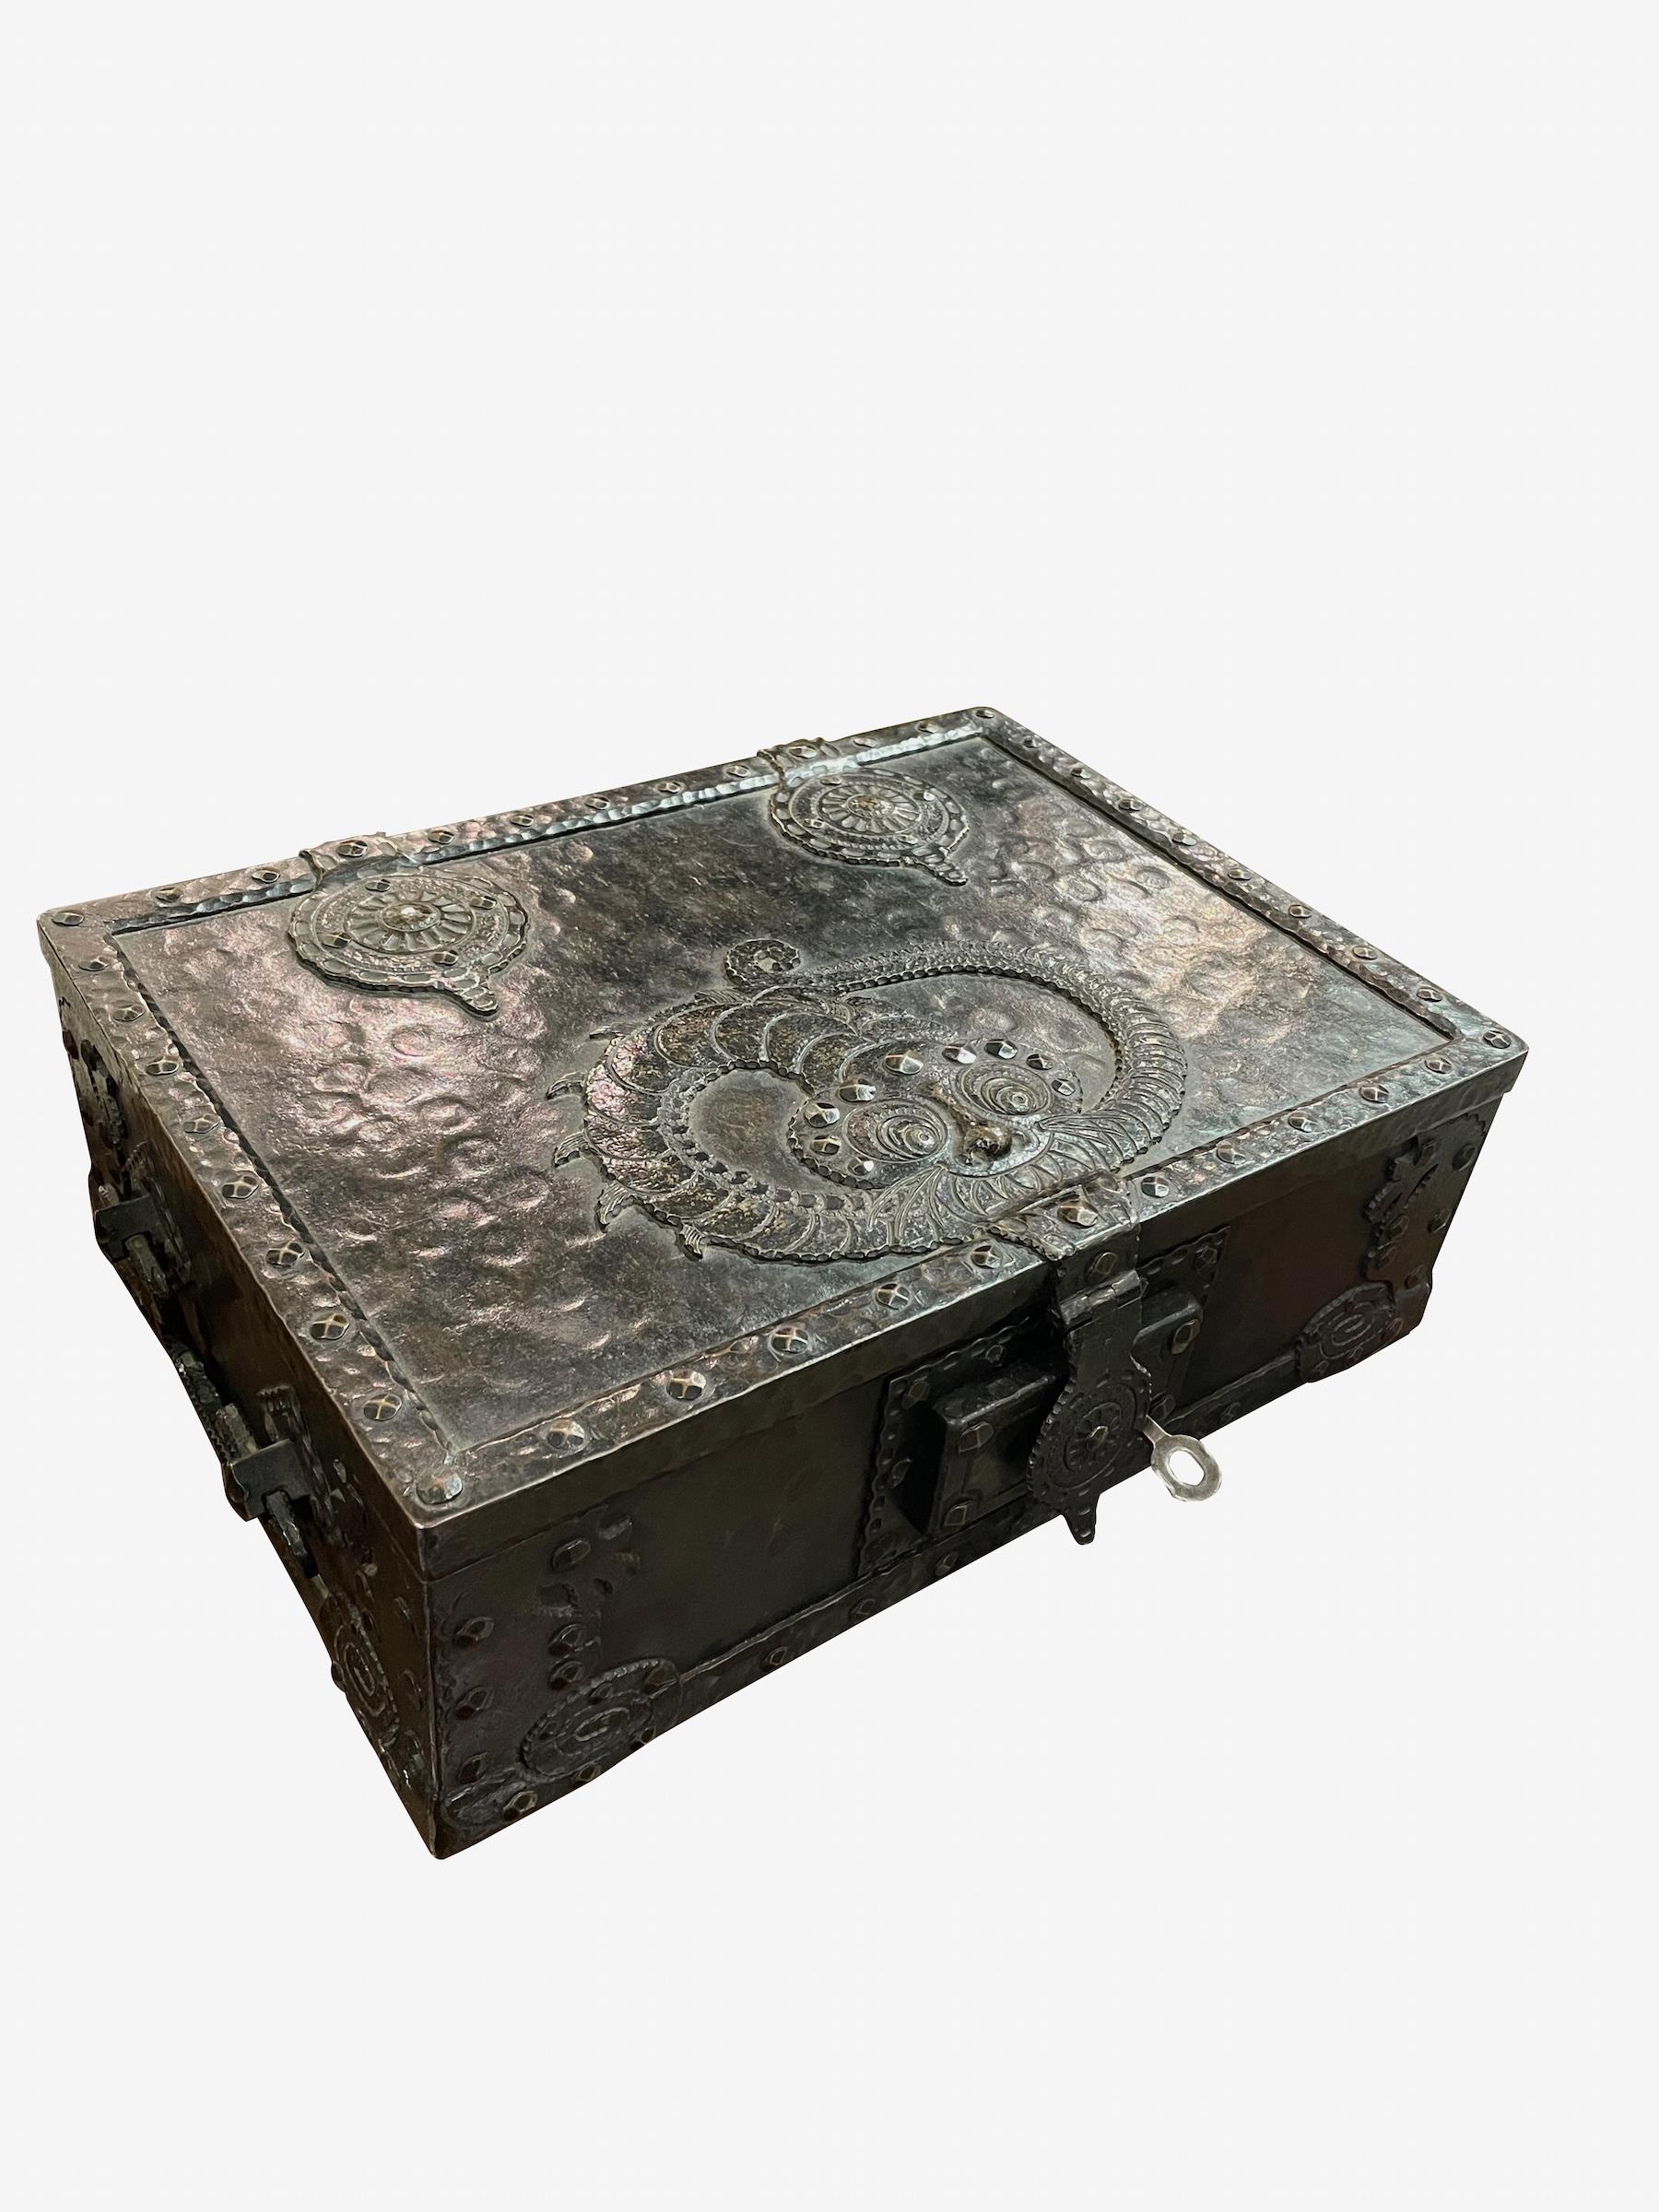 19th century Italian steel box with raised decorative motifs.
Original key.
Two handles.
Hammered border with rivets.
ARRIVING APRIL